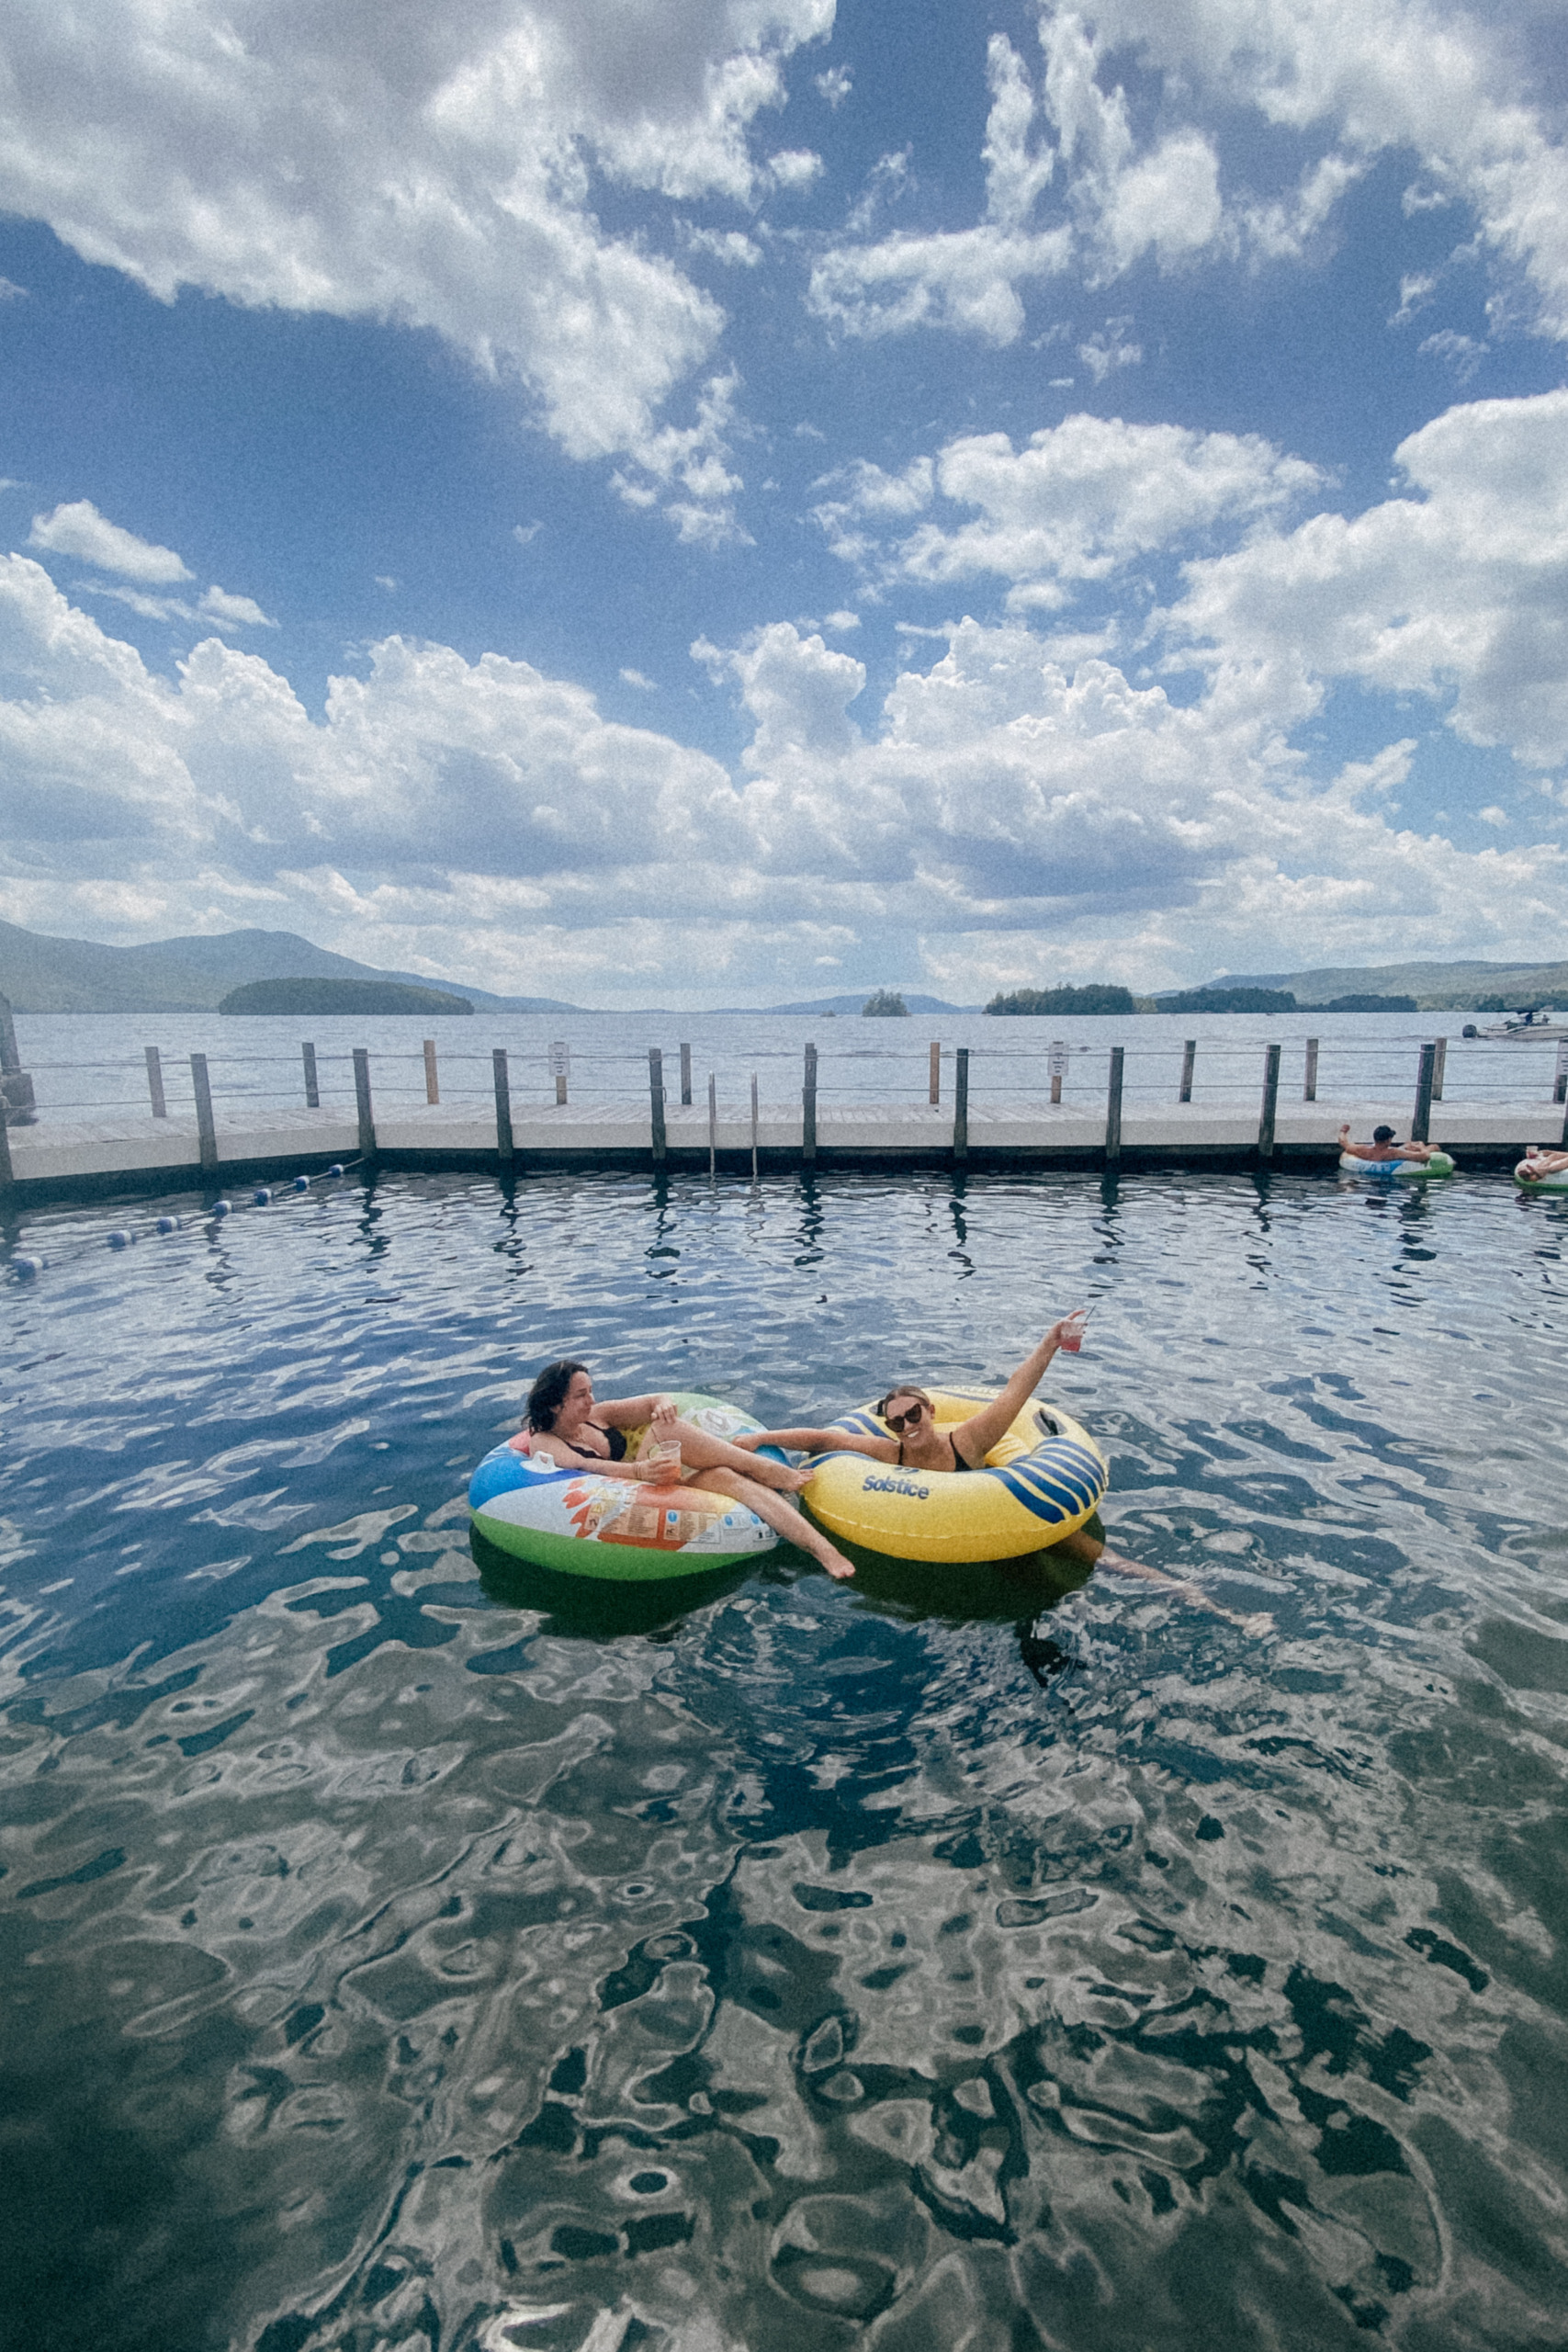 Three Day Getaway to The Sagamore Resort on Lake George New York - Simply by Simone and Jackie Giardina in Lake George with Tubes